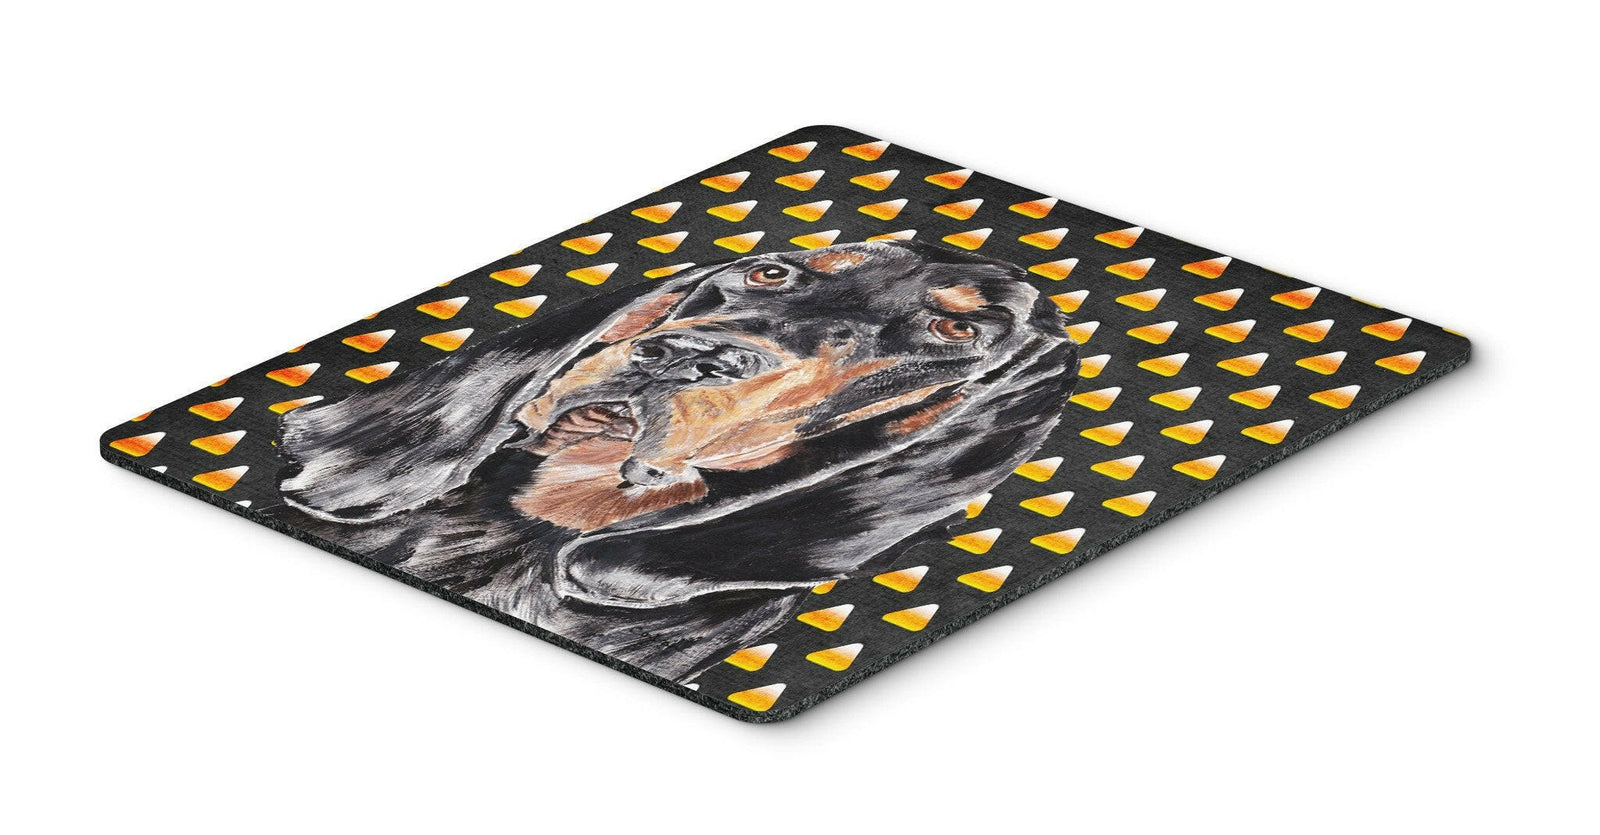 Coonhound Halloween Candy Corn Mouse Pad, Hot Pad or Trivet by Caroline's Treasures